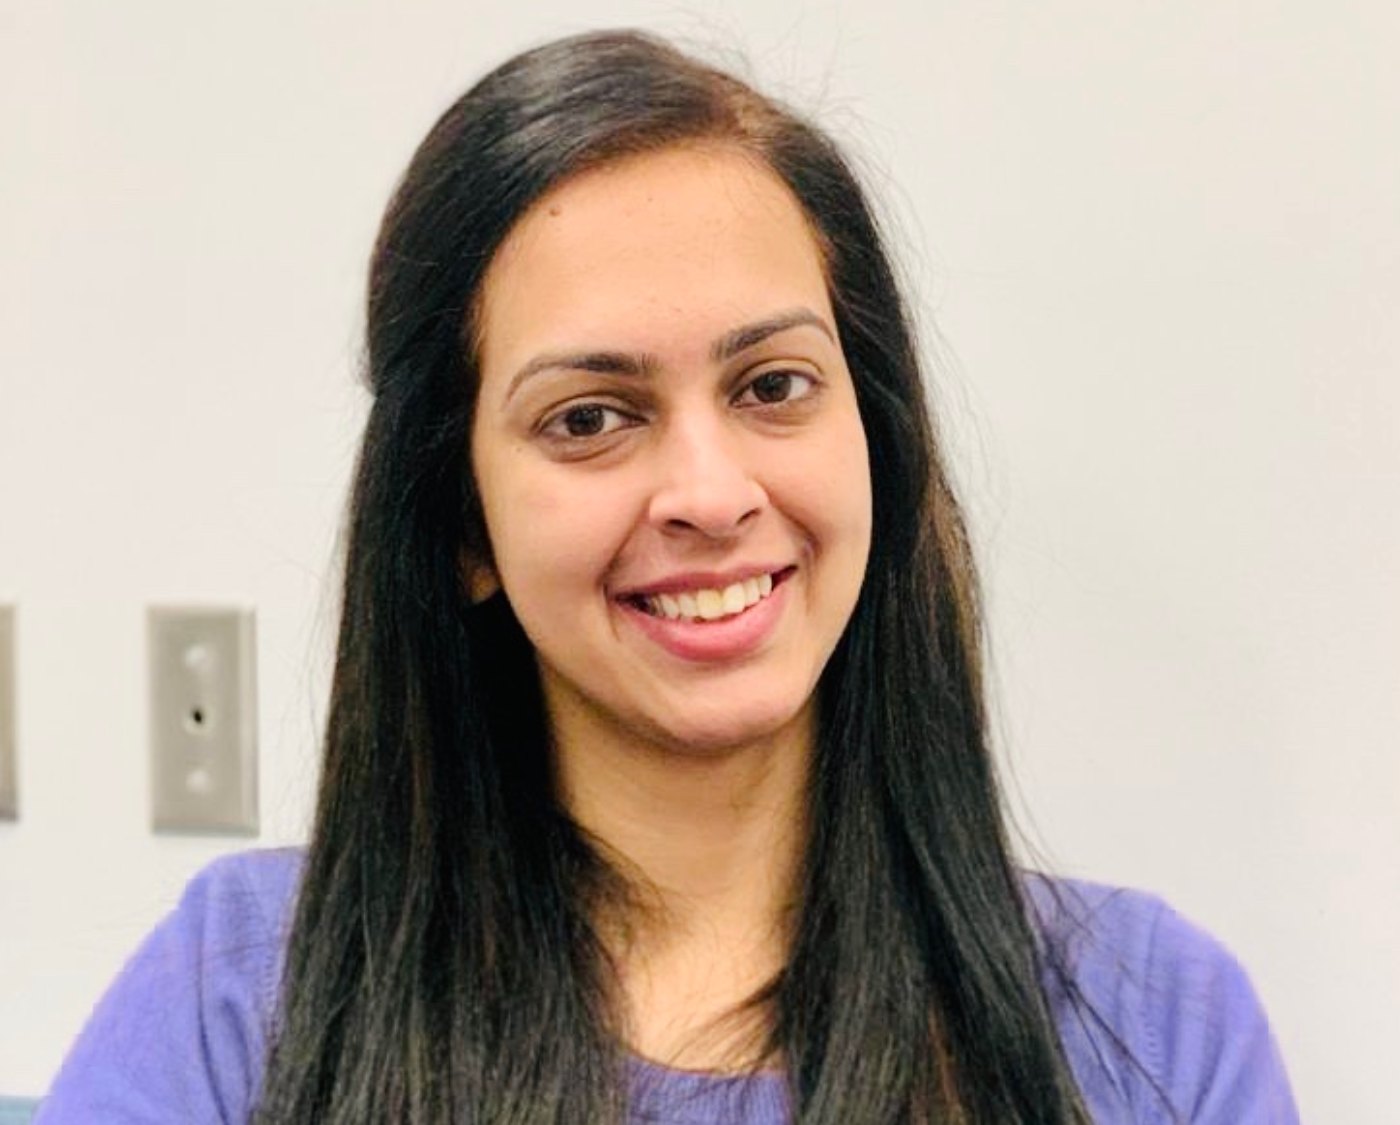 USask PhD candidate Loveleen Dhillon. (Photo: Submitted)